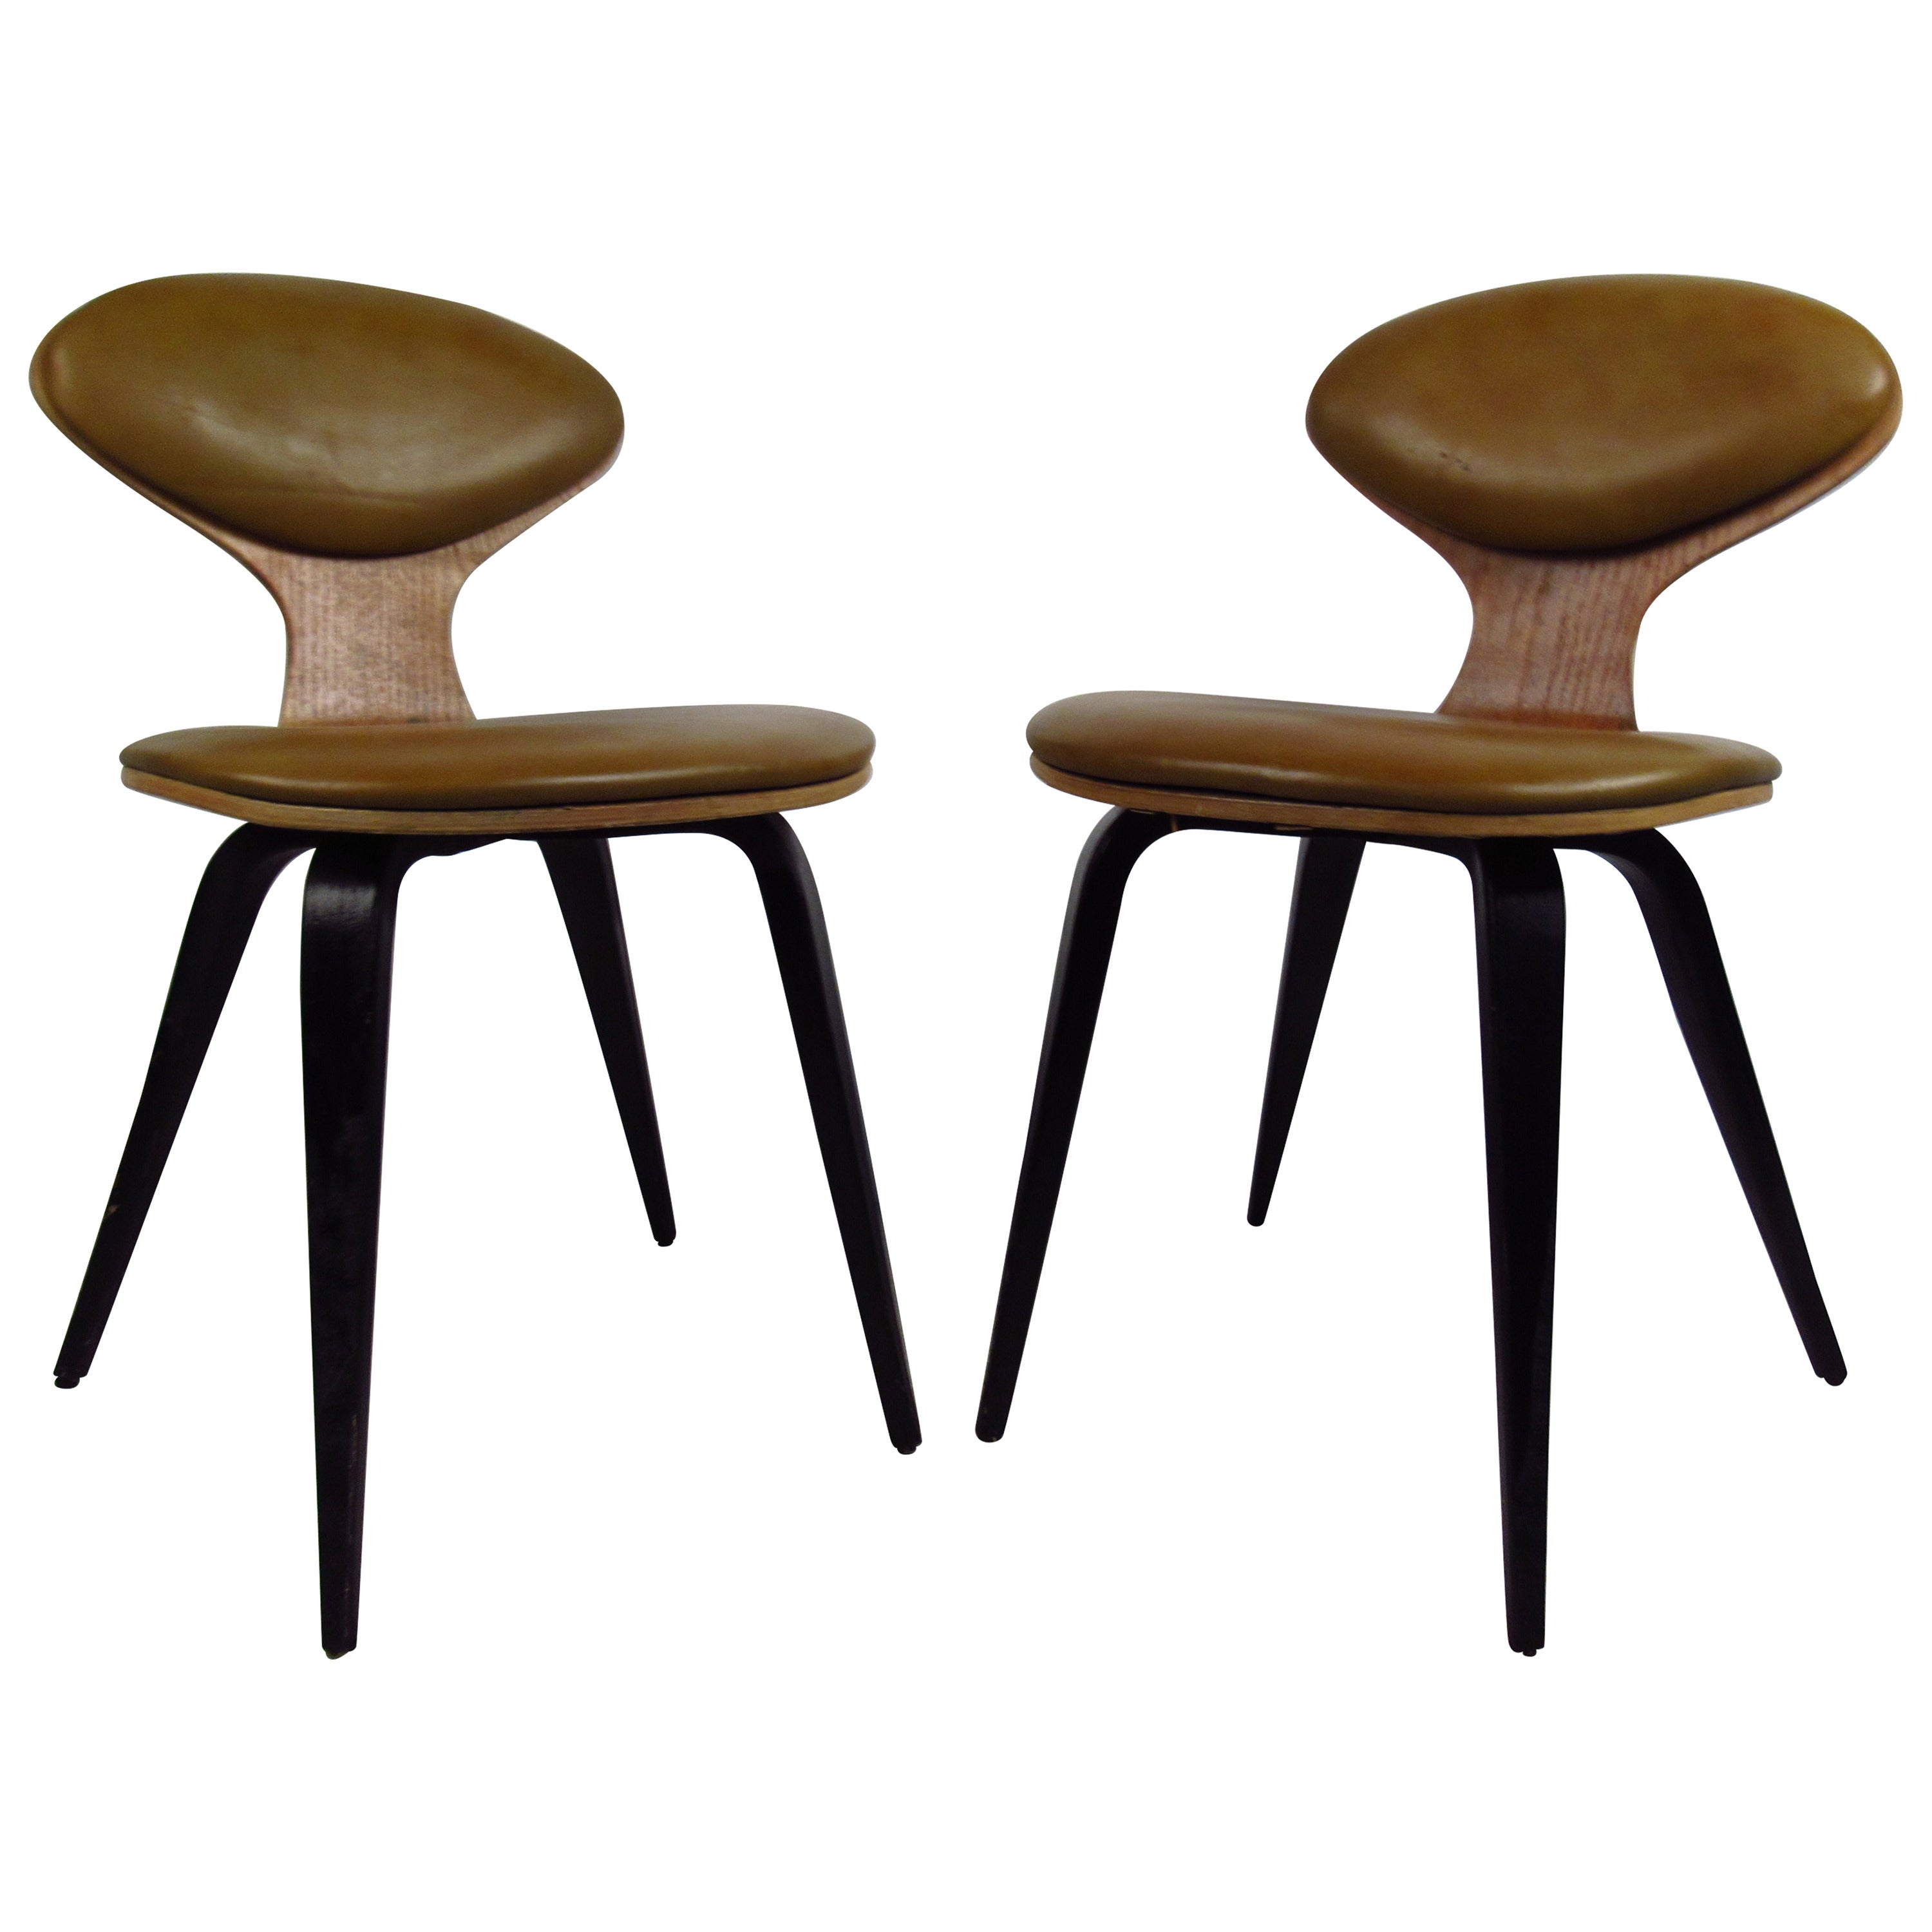 Pair of Mid-Century Modern Bentwood Chairs in the Style of Norman Cherner